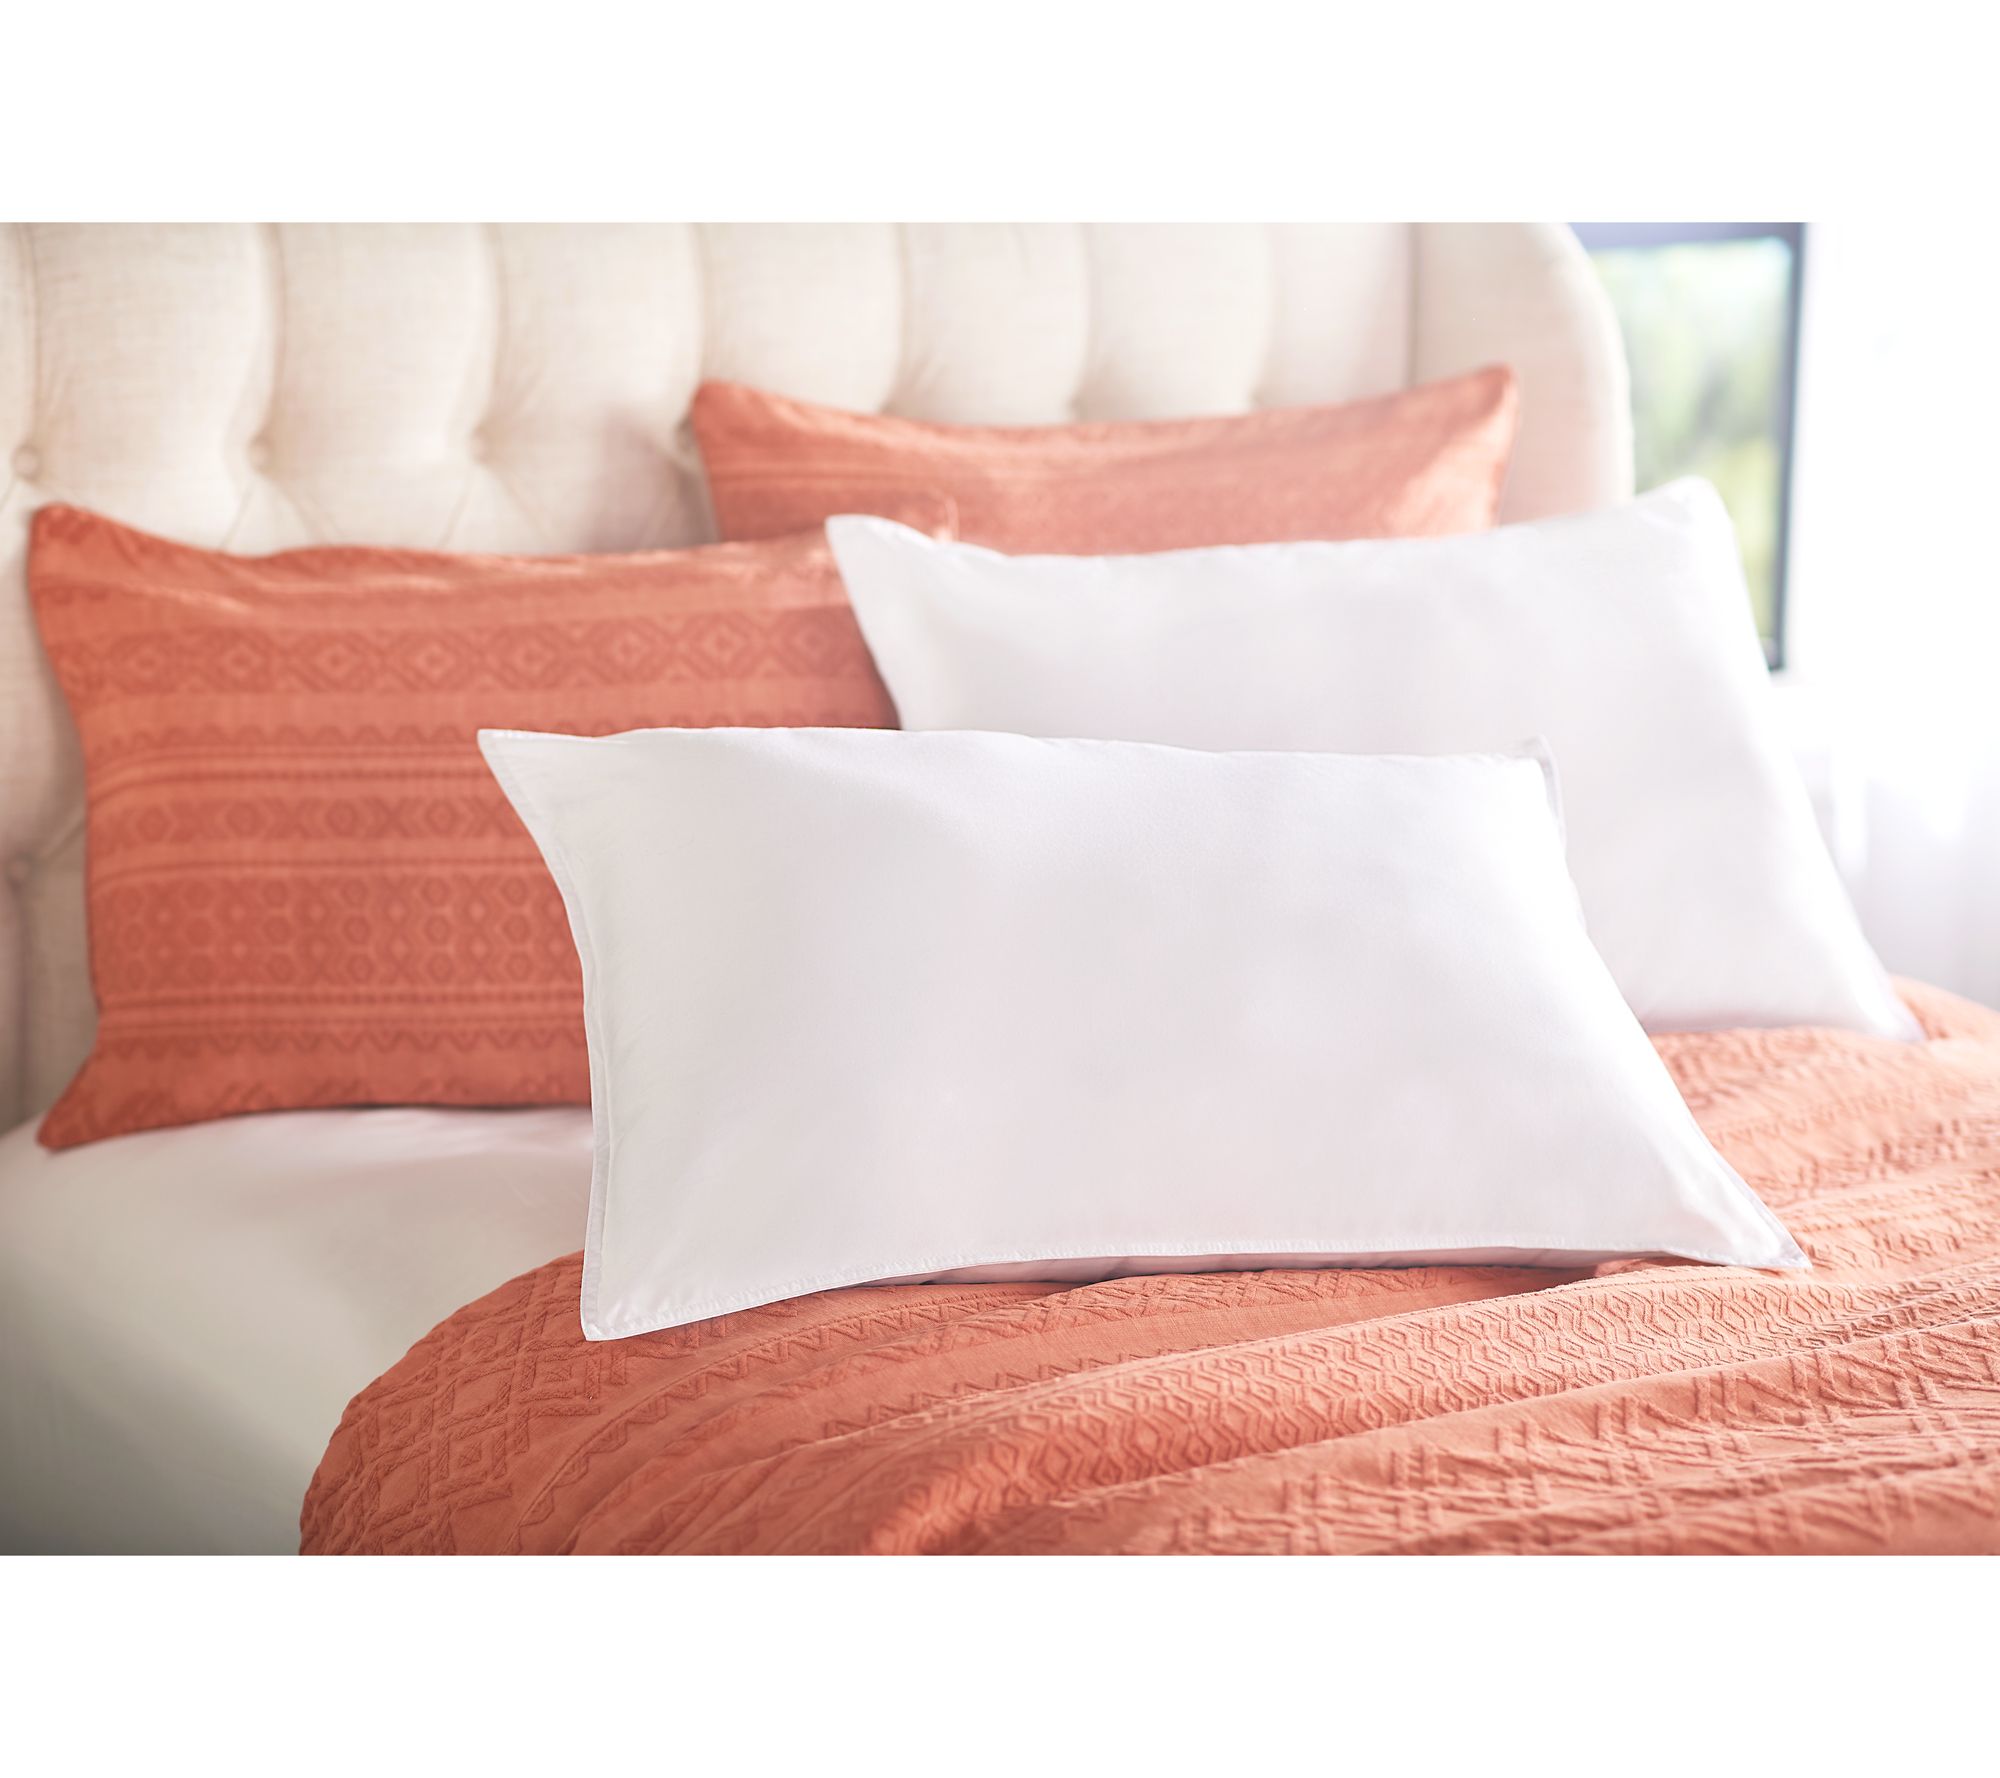 2PK MICROFIBER HOTEL COLLECTION PILLOW - Silver Dime Limited